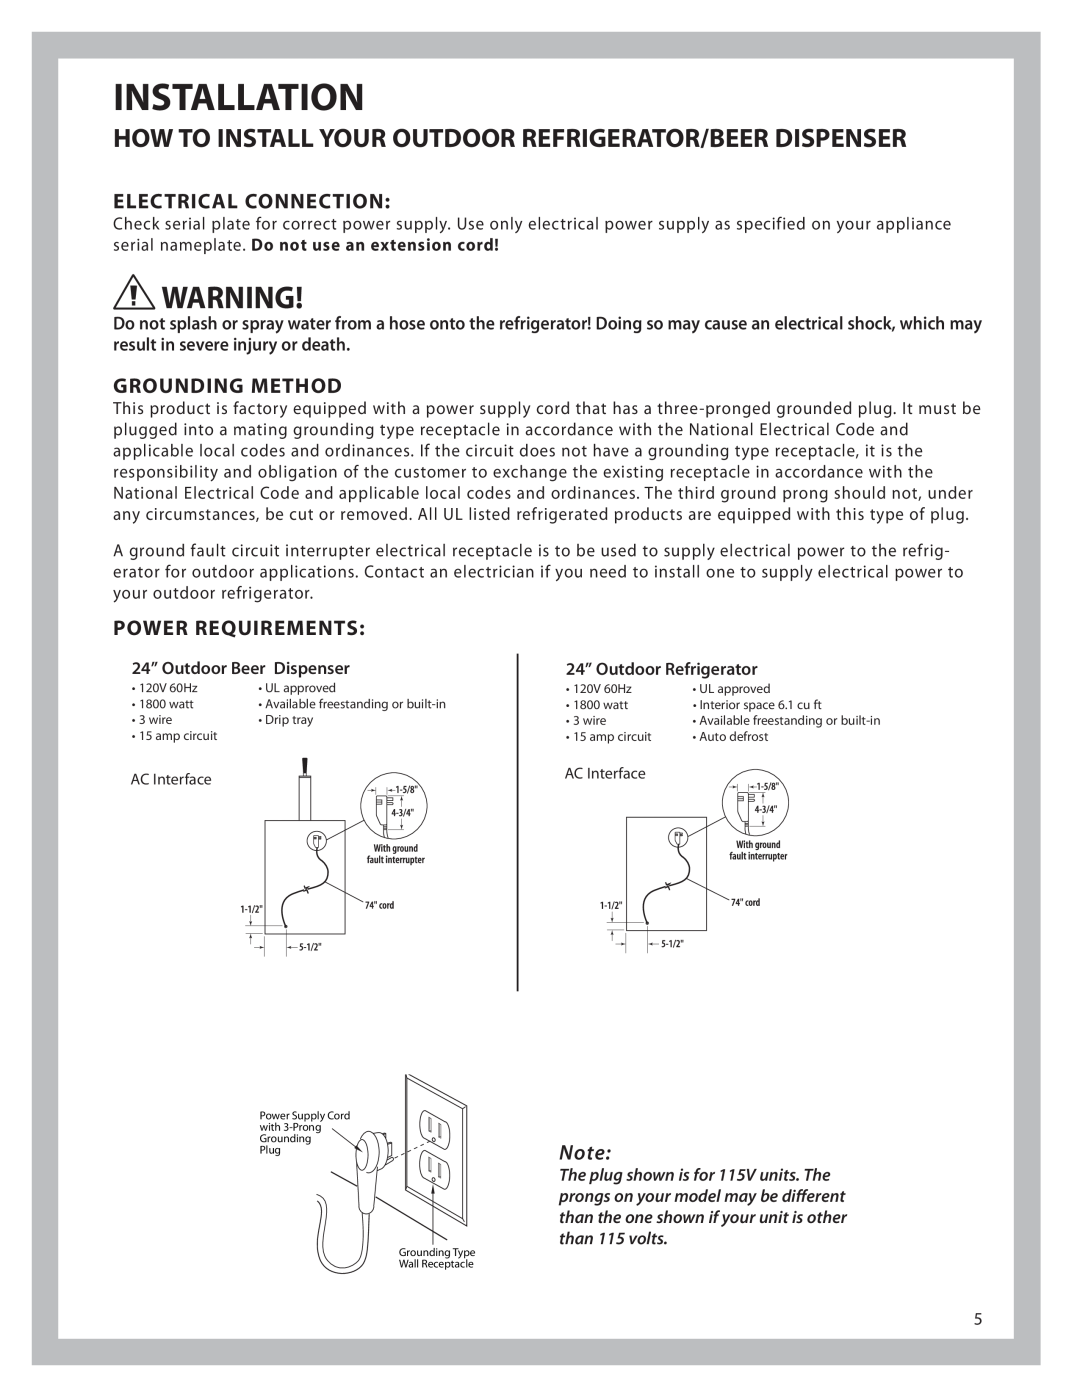 DCS UT624, UR624 manual Electrical Connection, Grounding Method, Power Requirements, Installation 